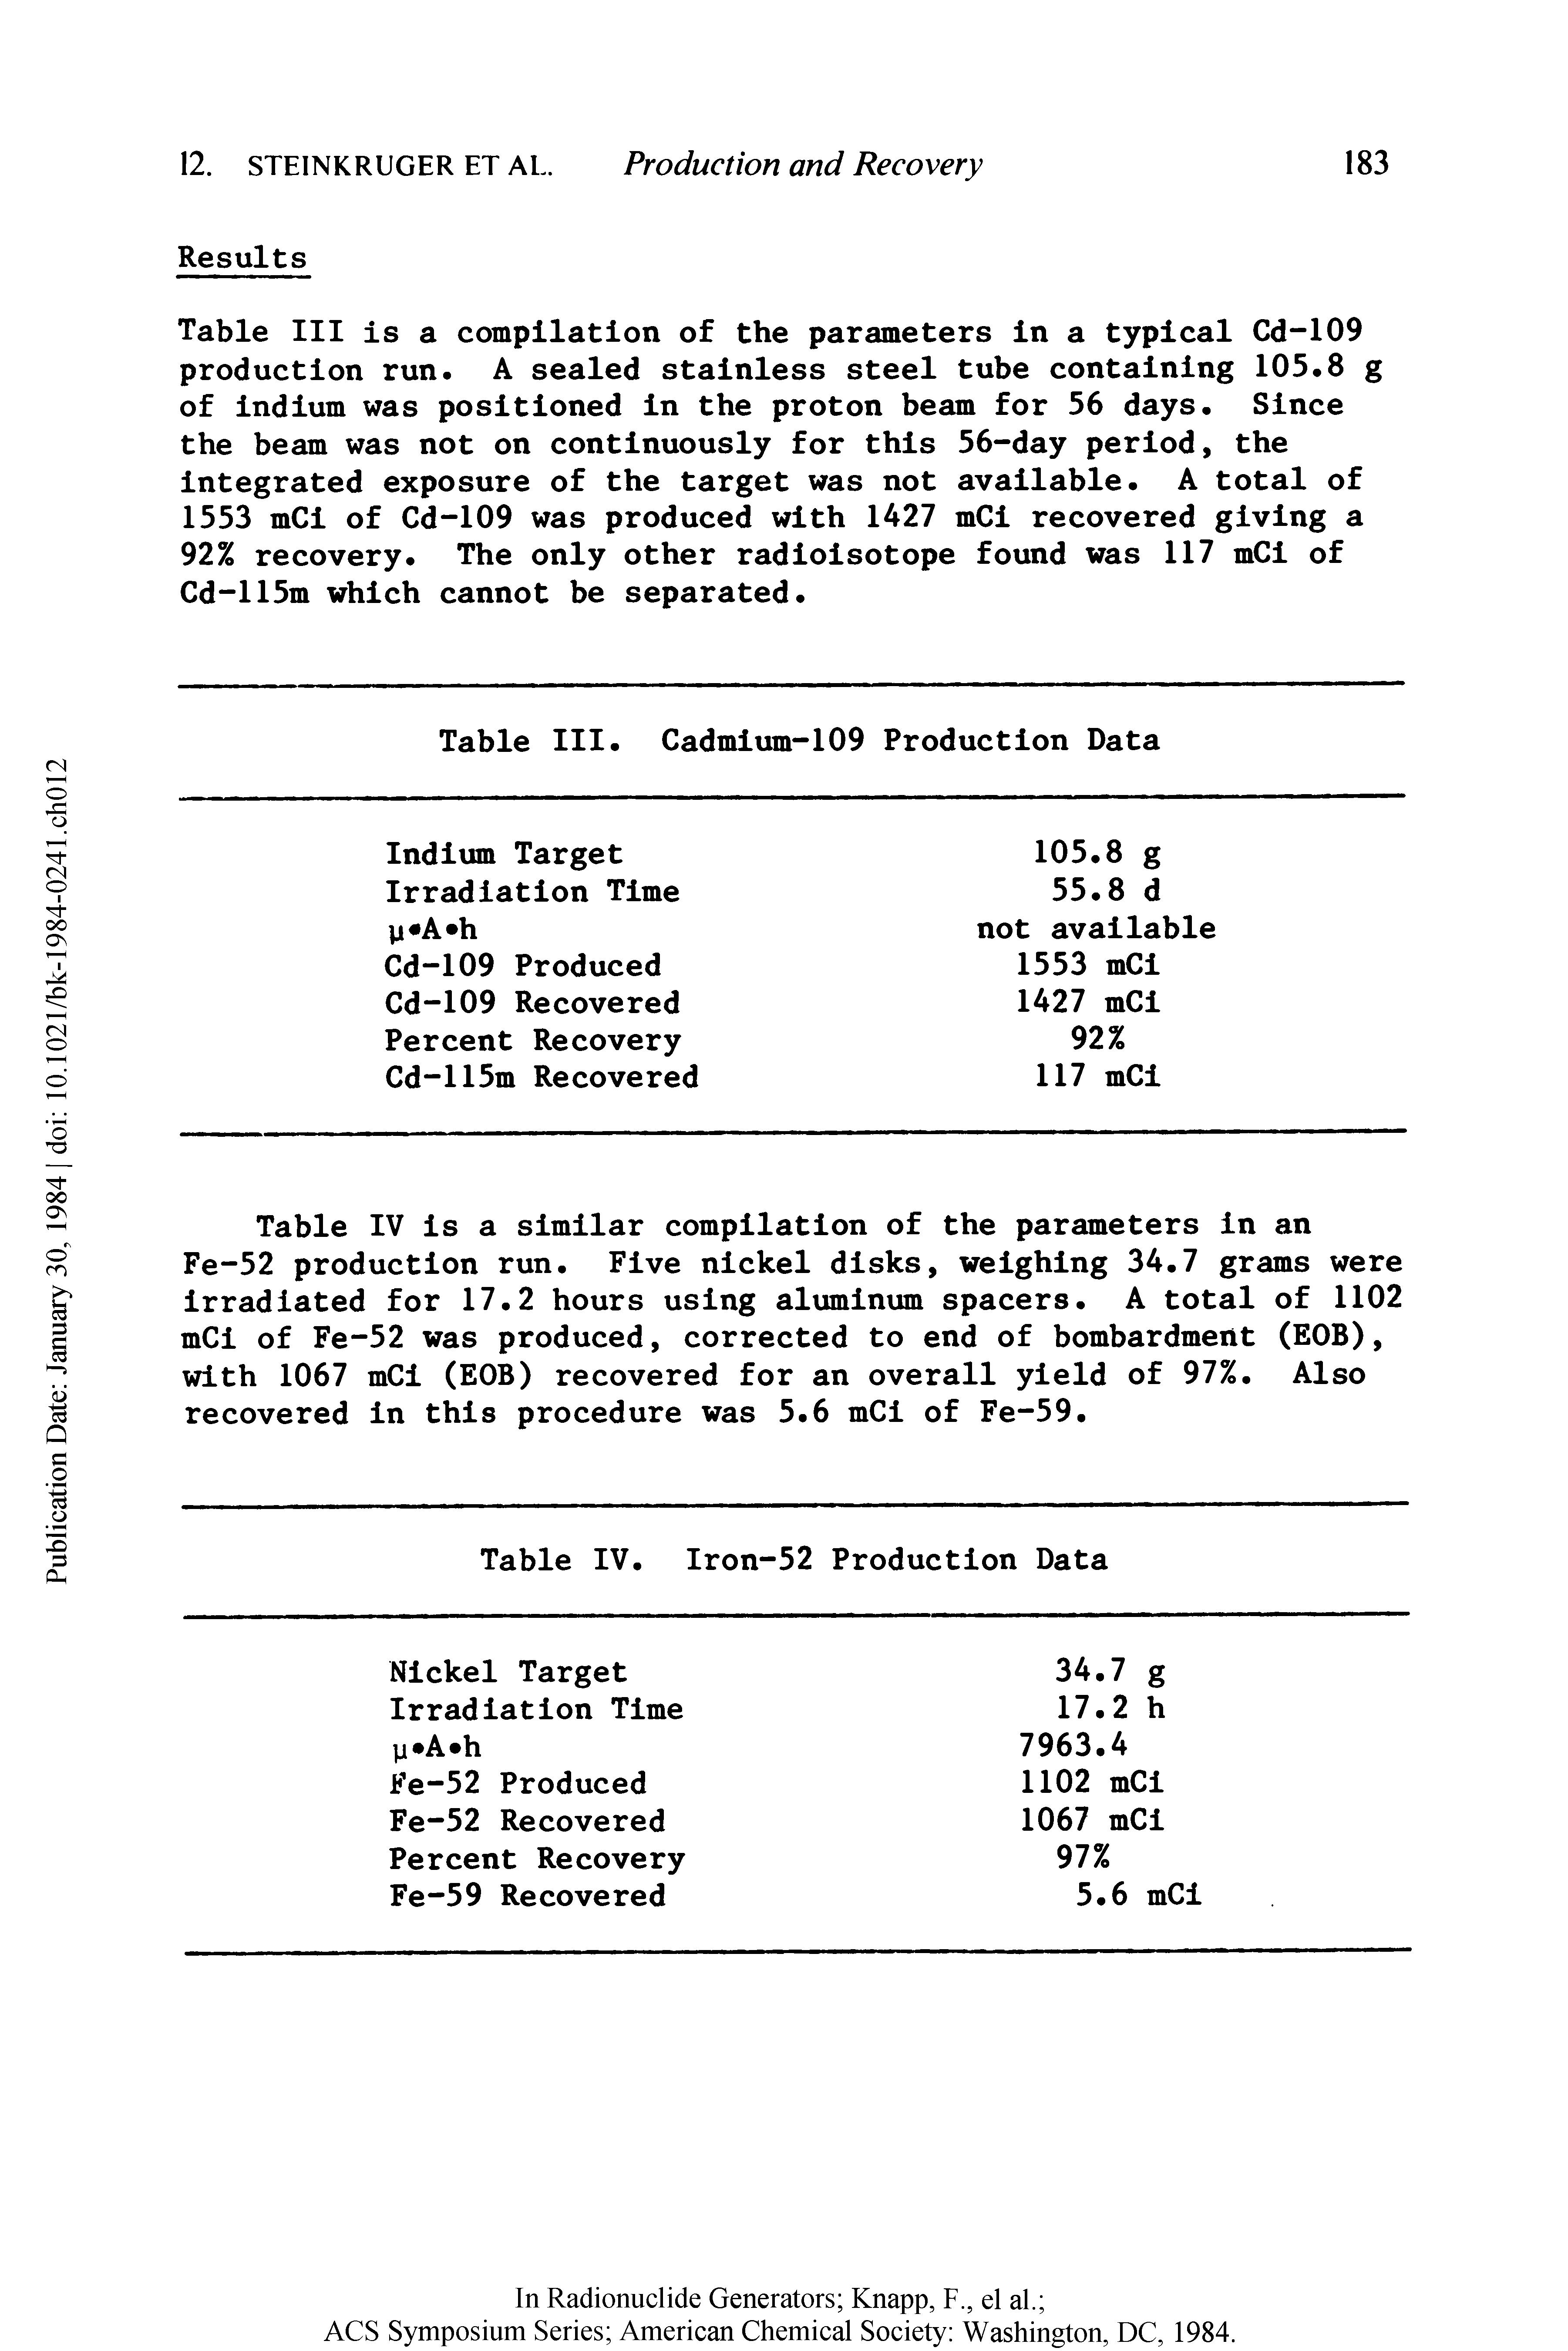 Table III is a compilation of the parameters in a typical Cd-109 production run. A sealed stainless steel tube containing 105.8 g of indium was positioned in the proton beam for 56 days. Since the beam was not on continuously for this 56-day period, the integrated exposure of the target was not available. A total of 1553 mCi of Cd-109 was produced with 1427 mCi recovered giving a 92% recovery. The only other radioisotope found was 117 mCi of Cd-115m which cannot be separated.